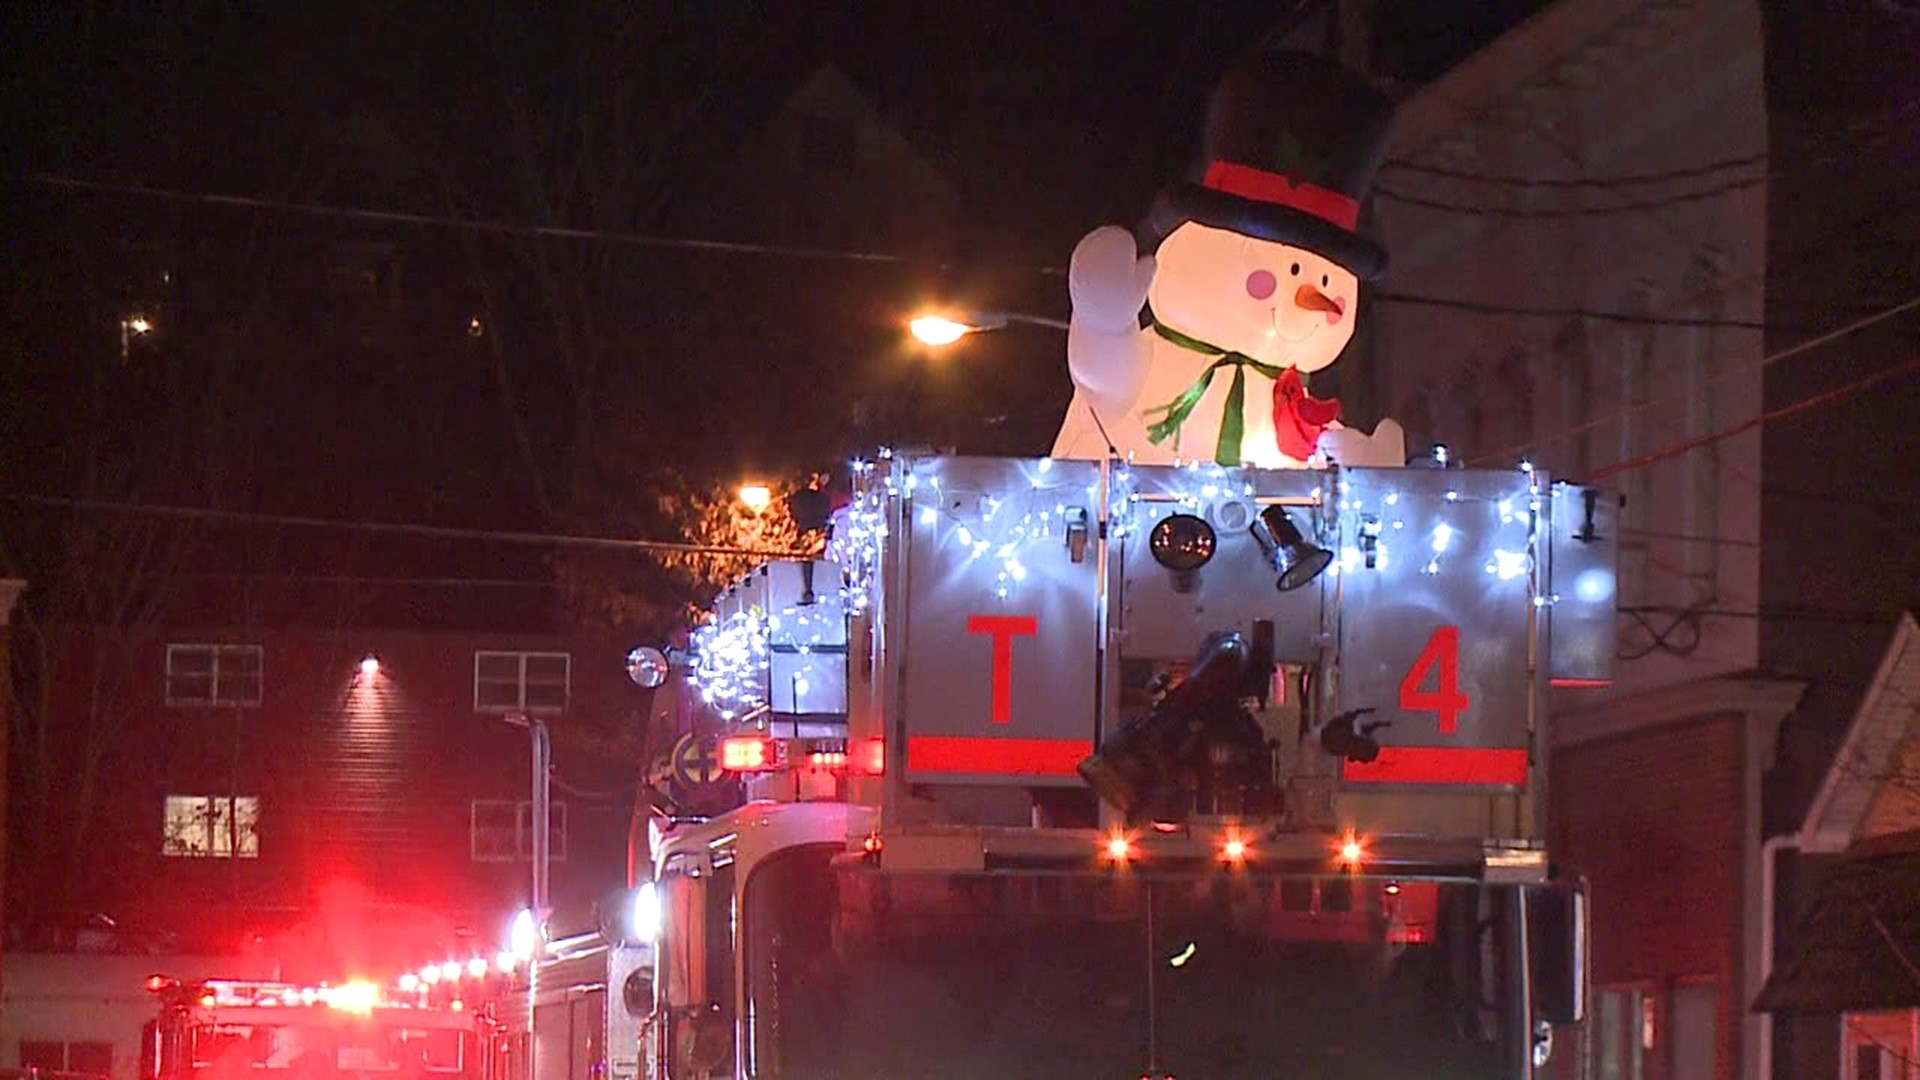 Families gathered together in Honesdale for the annual Winter Wonderland Festival Friday night.